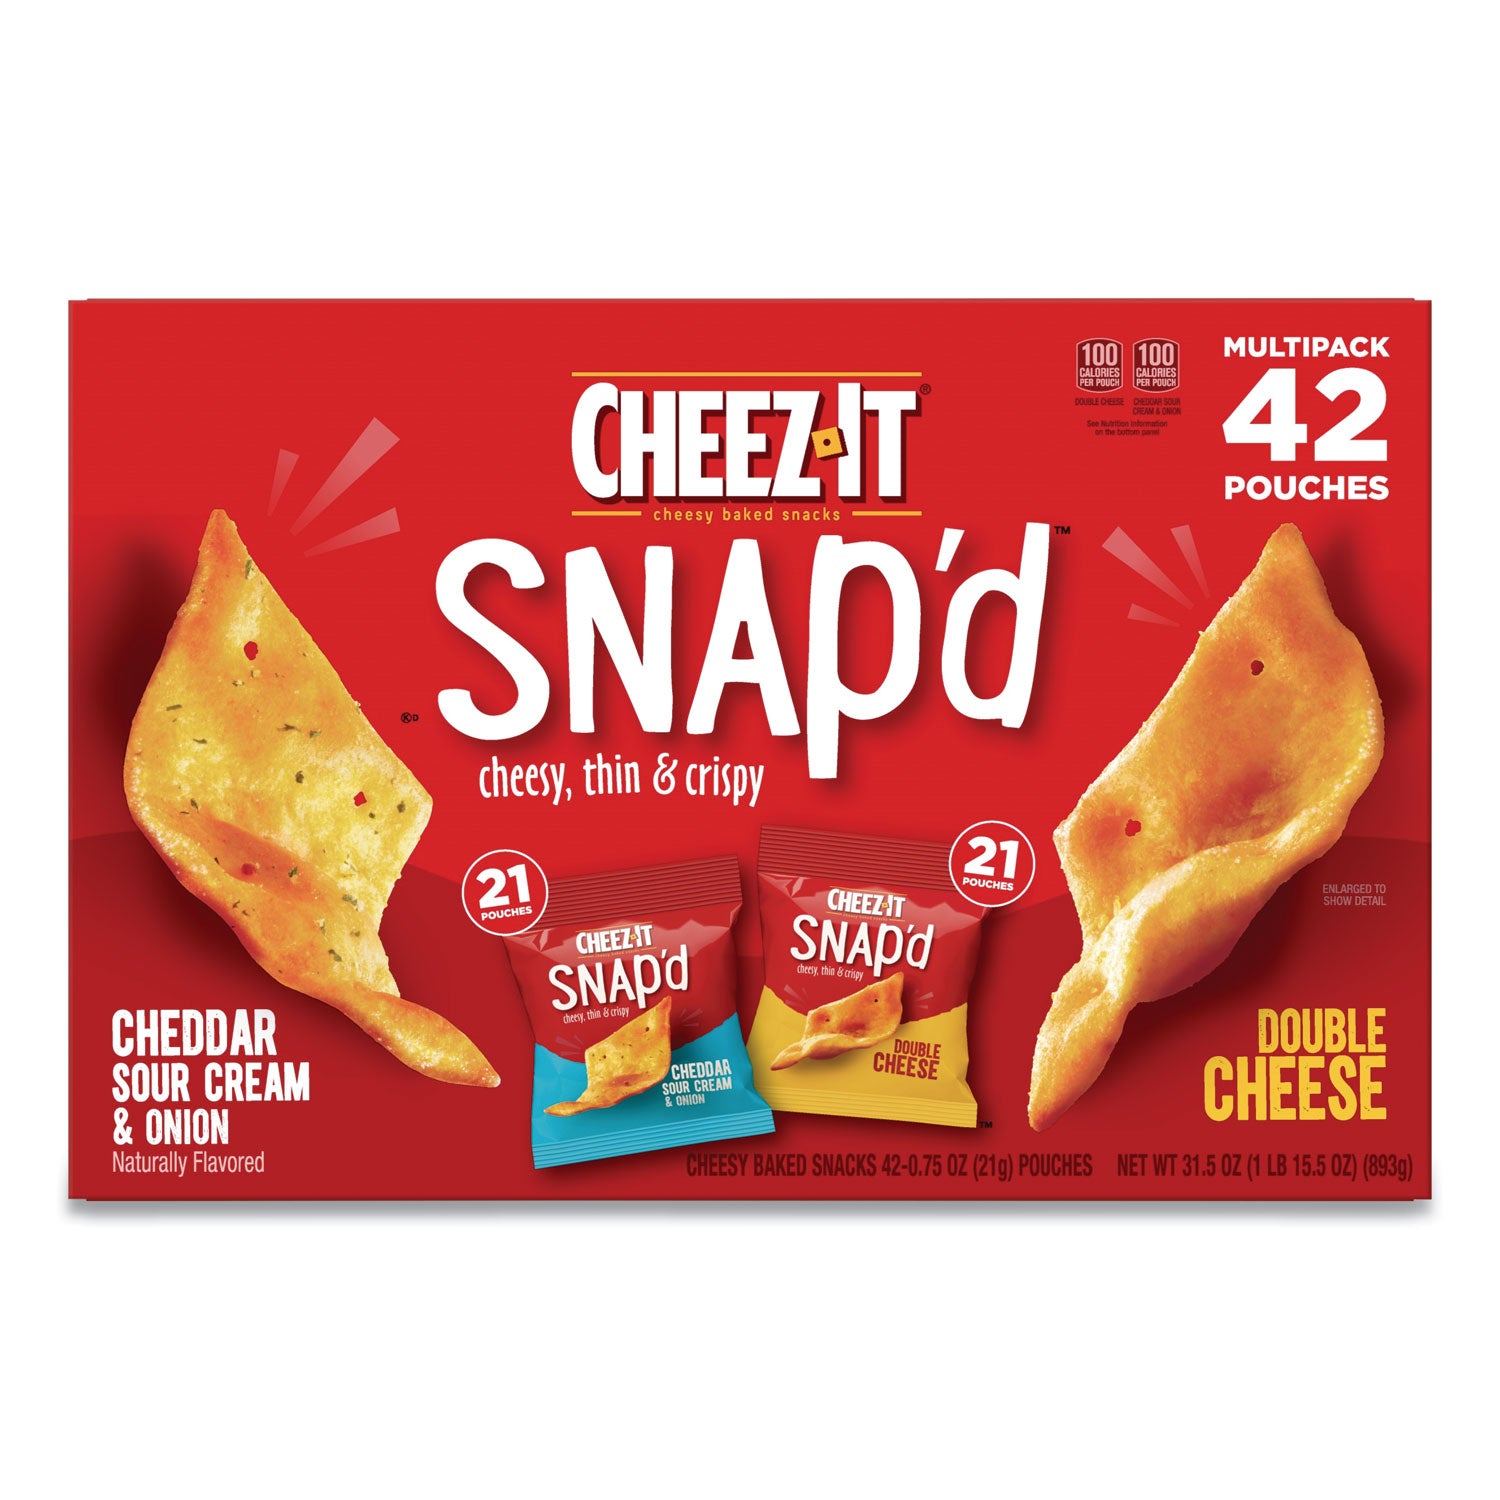 snapd-crackers-variety-pack-cheddar-sour-cream-and-onion;-double-cheese-075-oz-bag-42-carton_keb11500 - 1